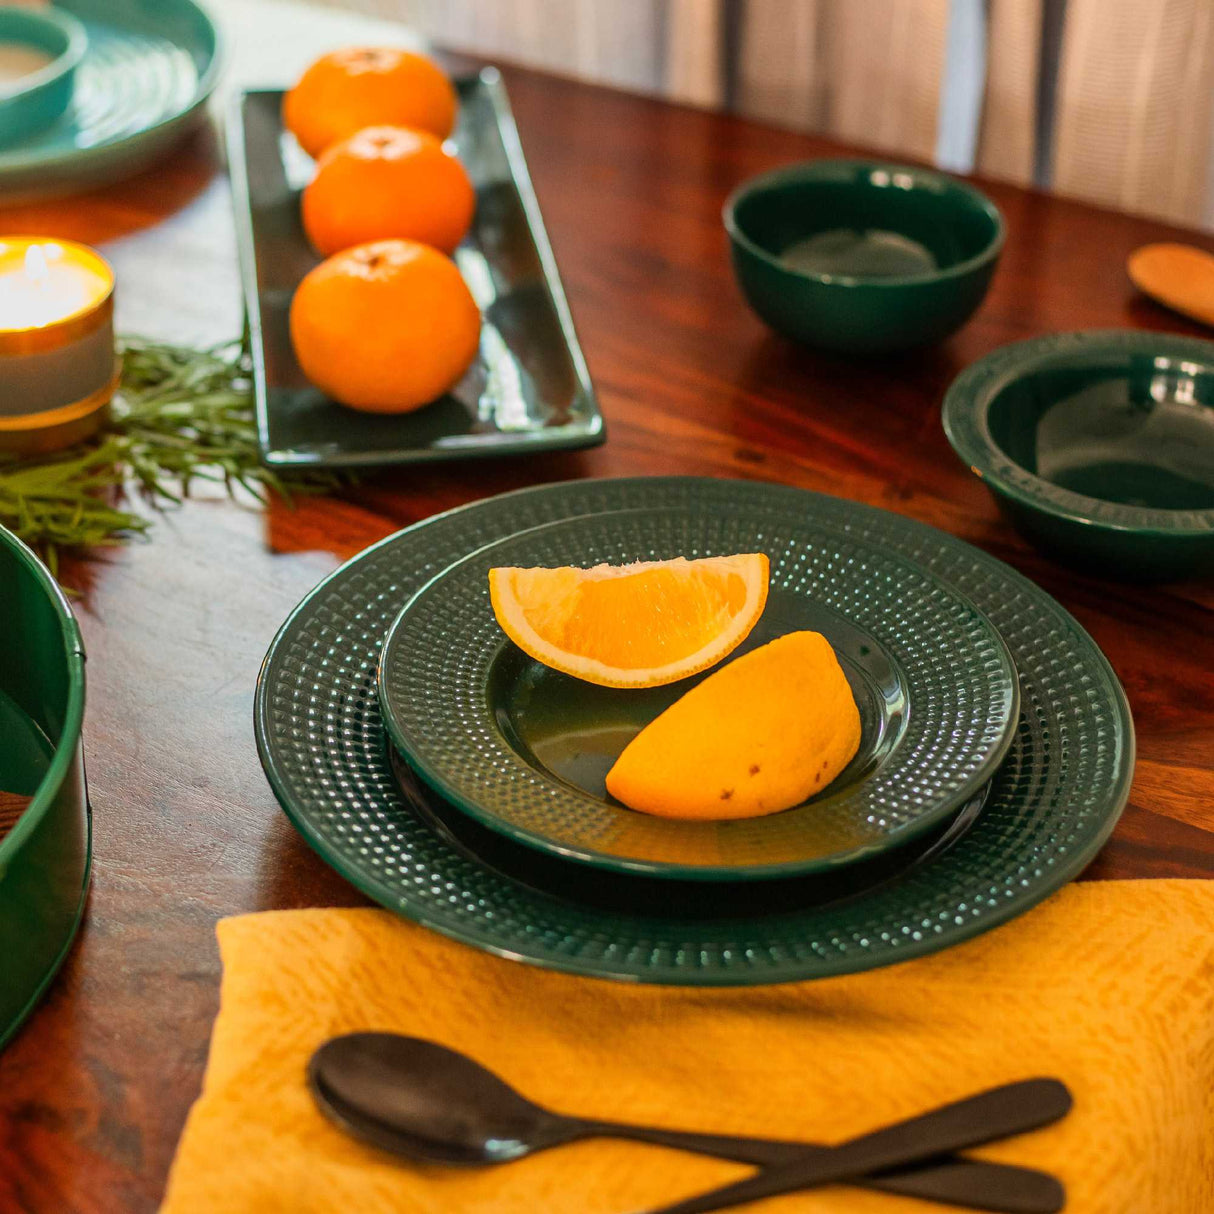 Dinner table setting with green ceramic plate